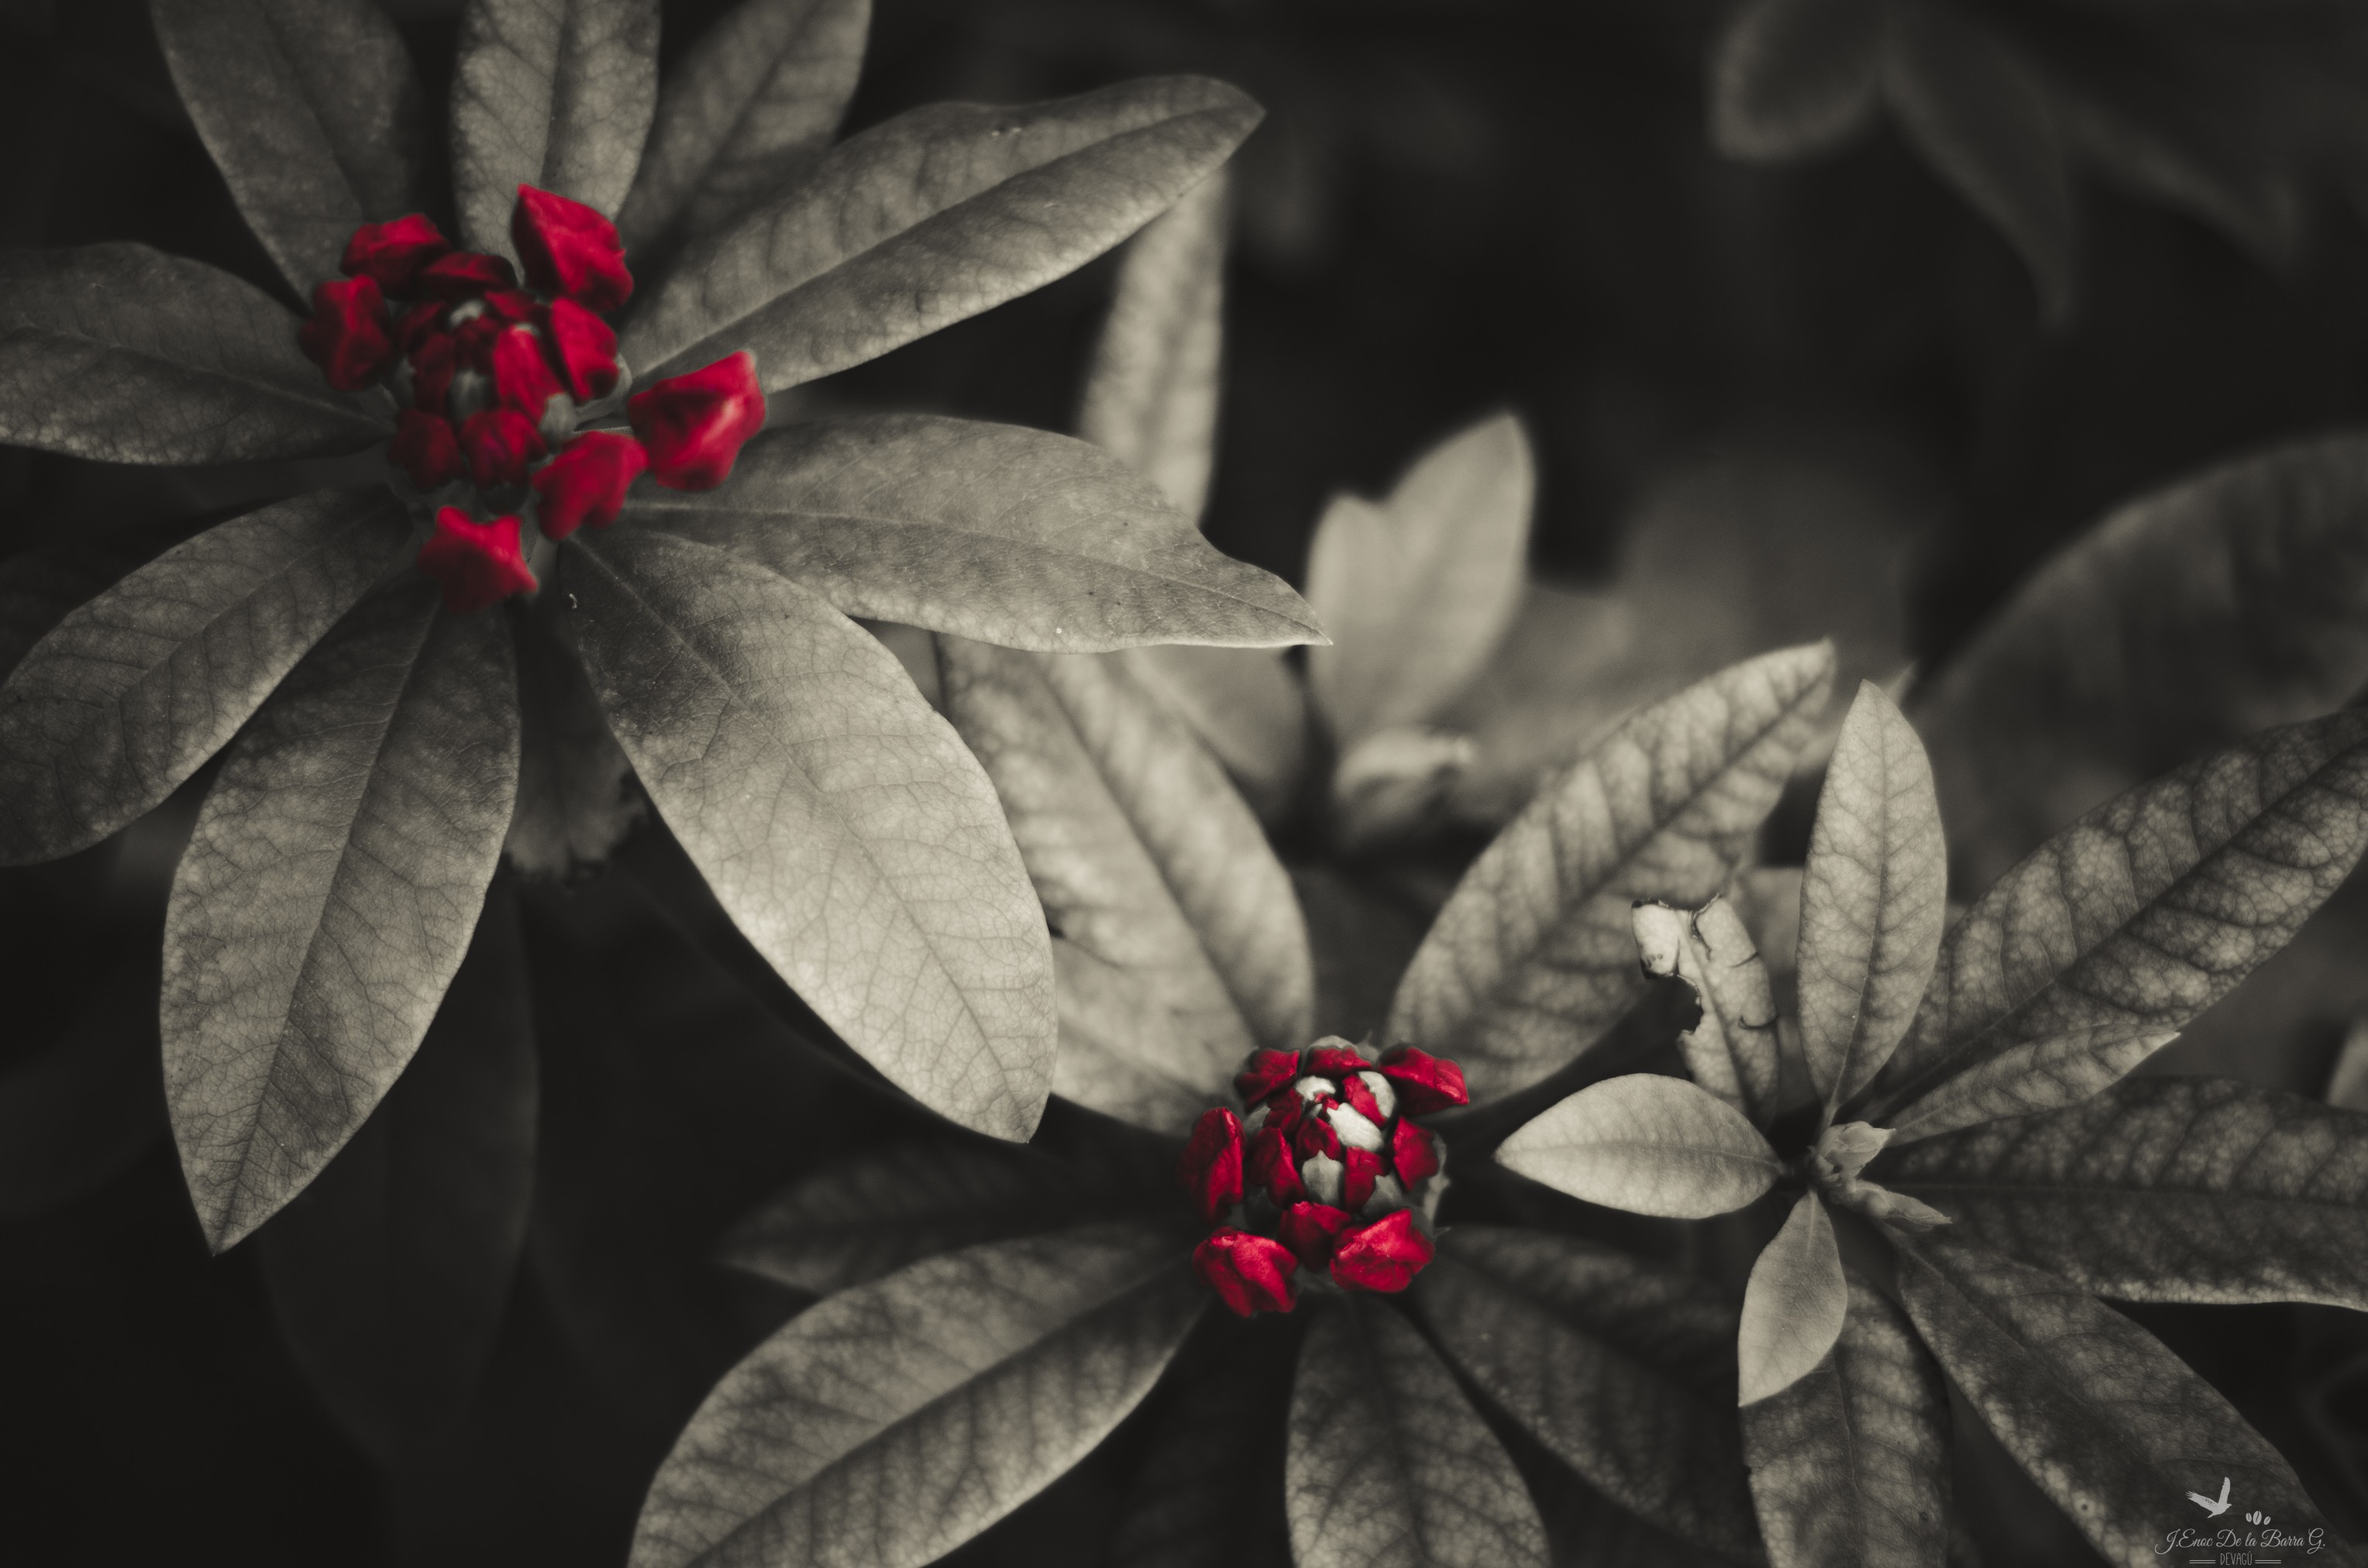 General 3056x2024 Rhododendron red flowers plants garden selective coloring